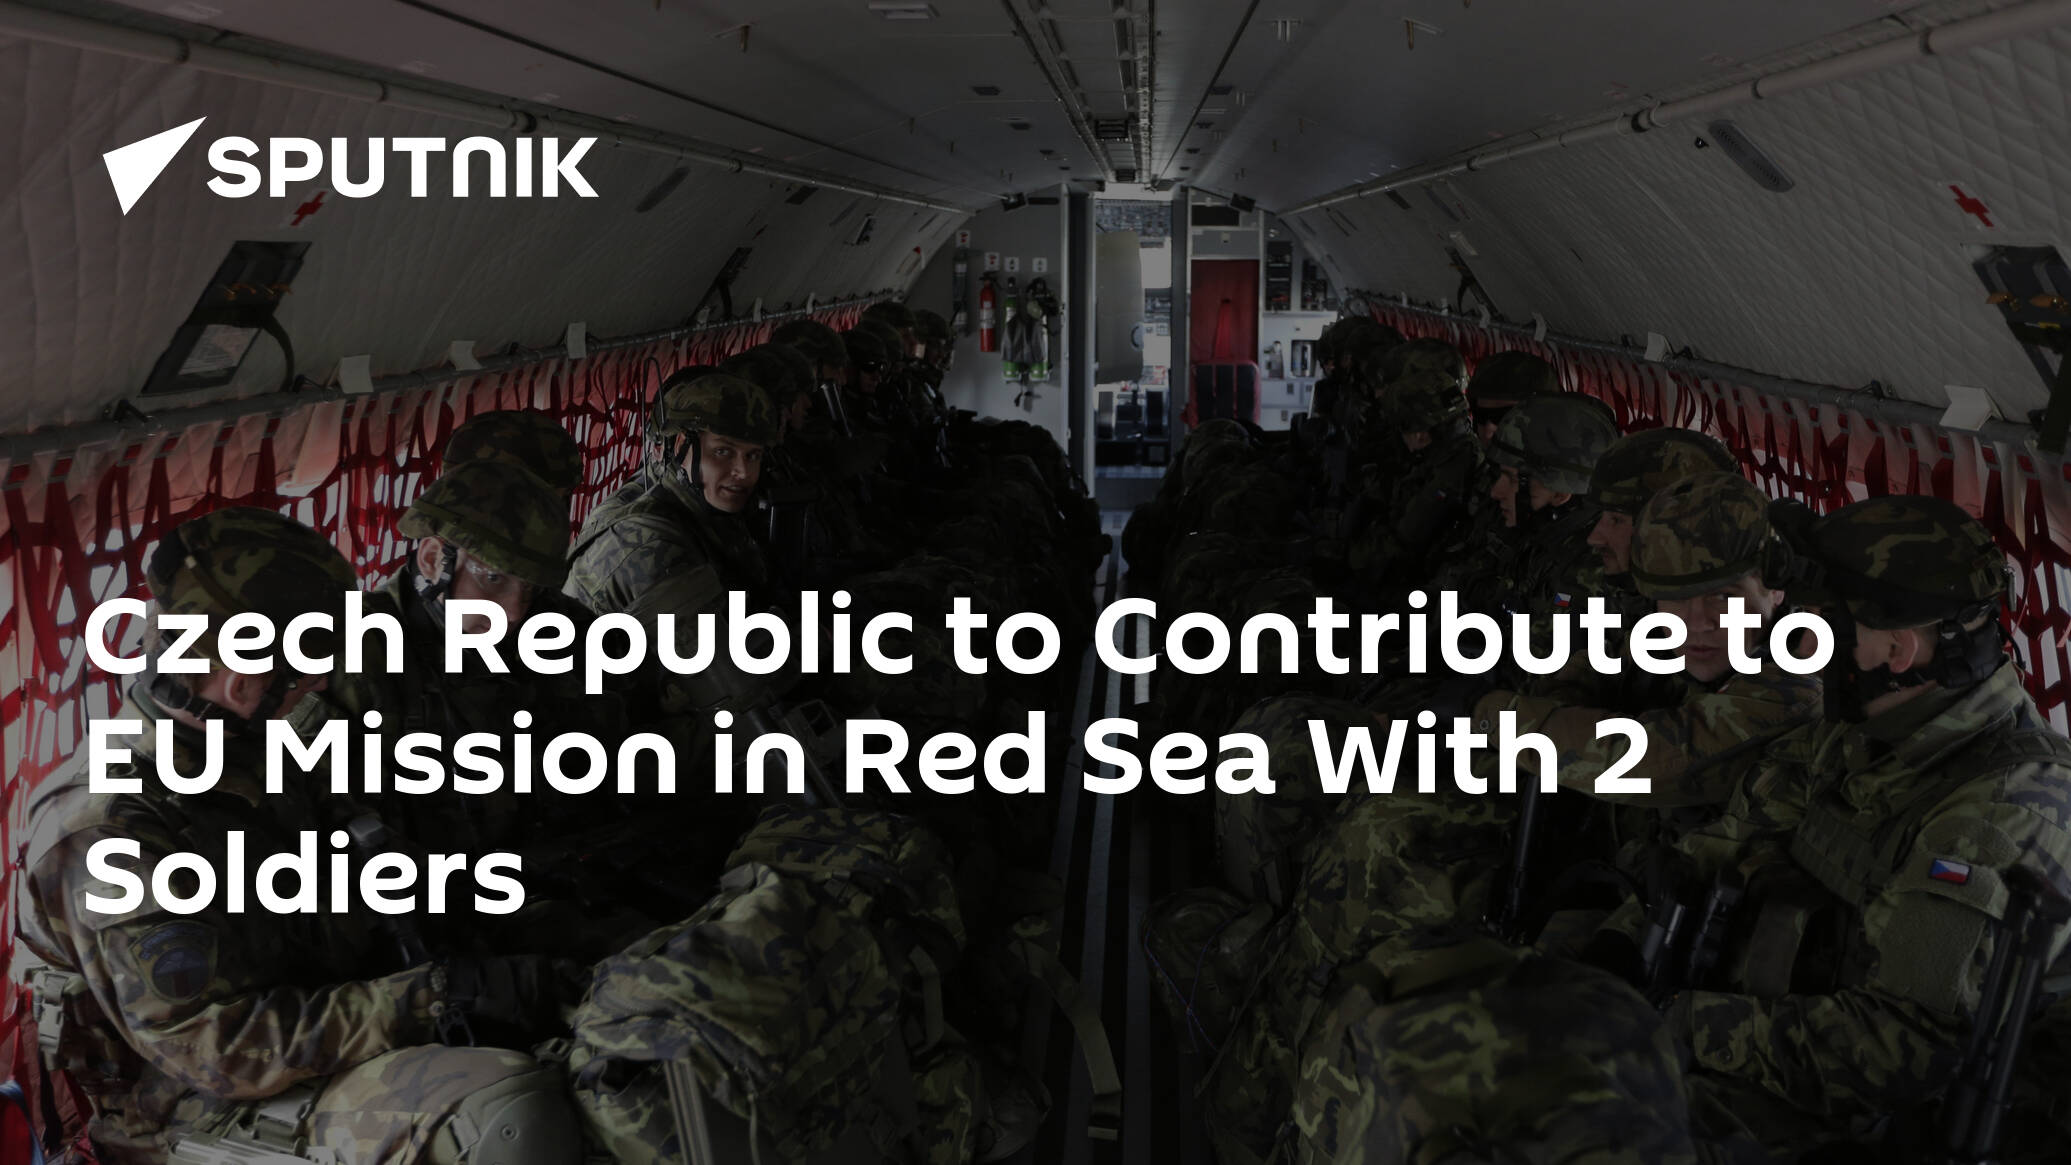 Czech Republic to Contribute to EU Mission in Red Sea With 2 Soldiers